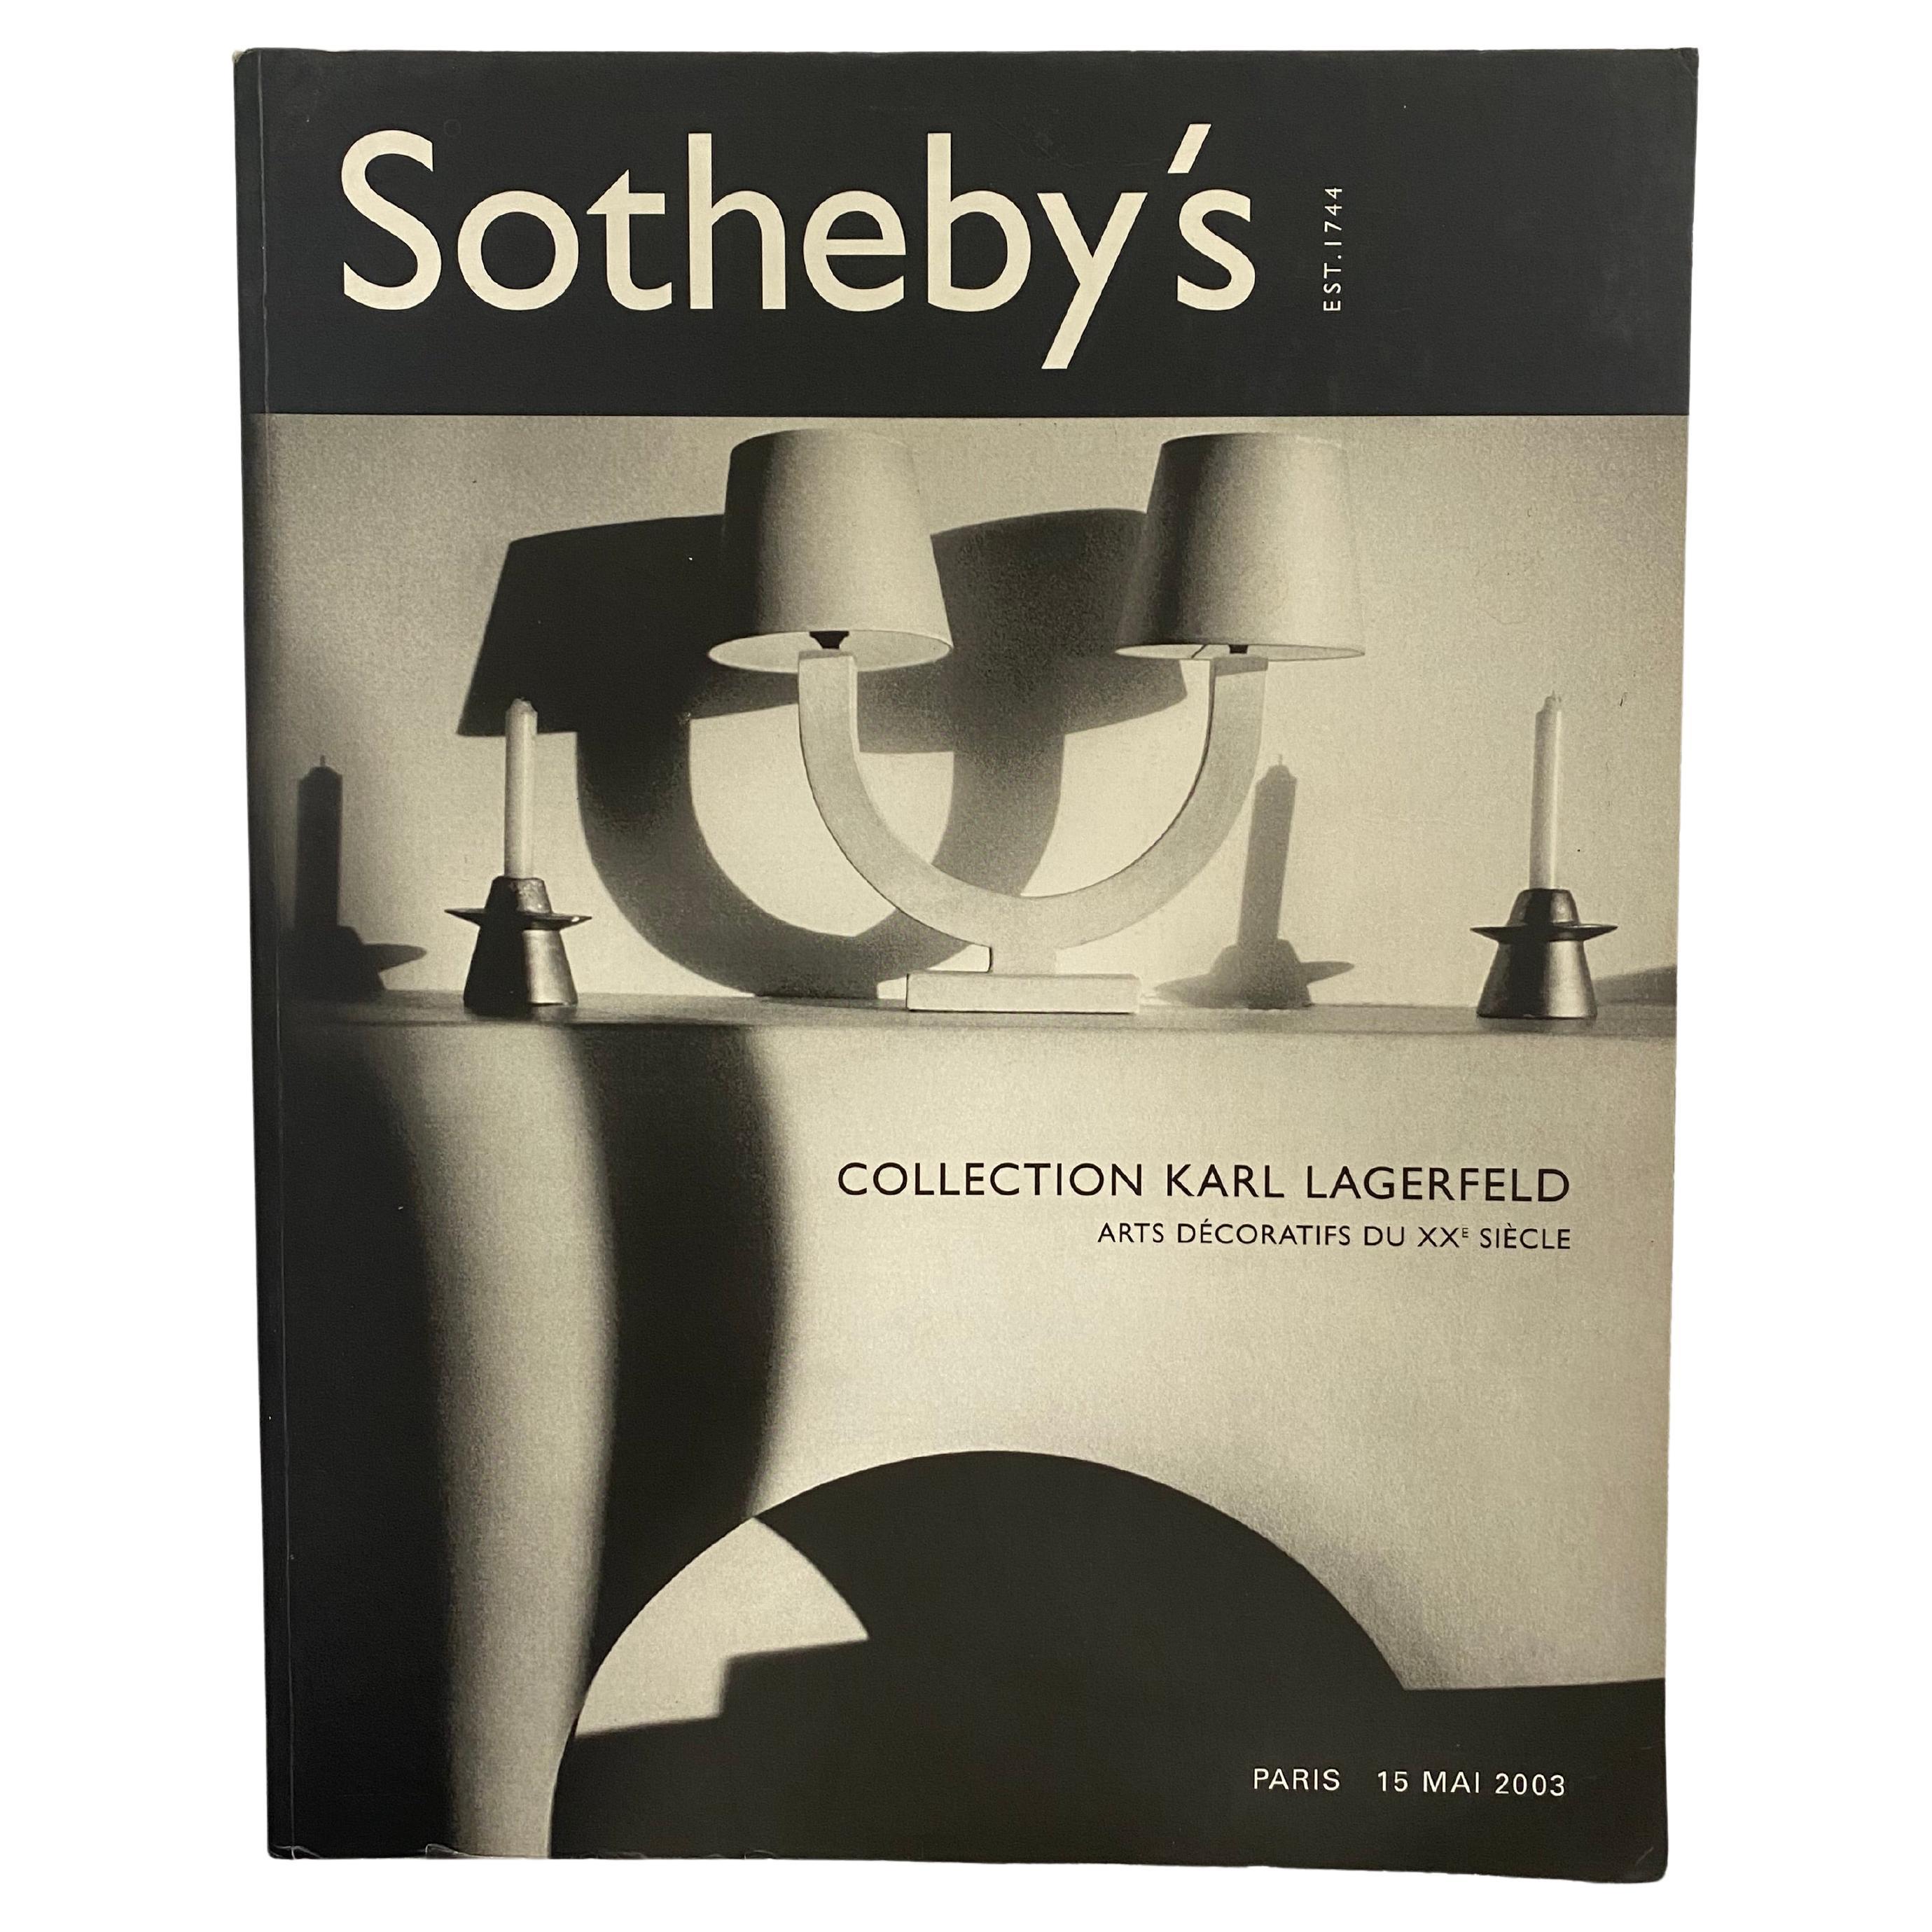 Collection Karl Lagerfeld: Arts Decoratifs Du XXe Siecle Sotheby's (Book) For Sale